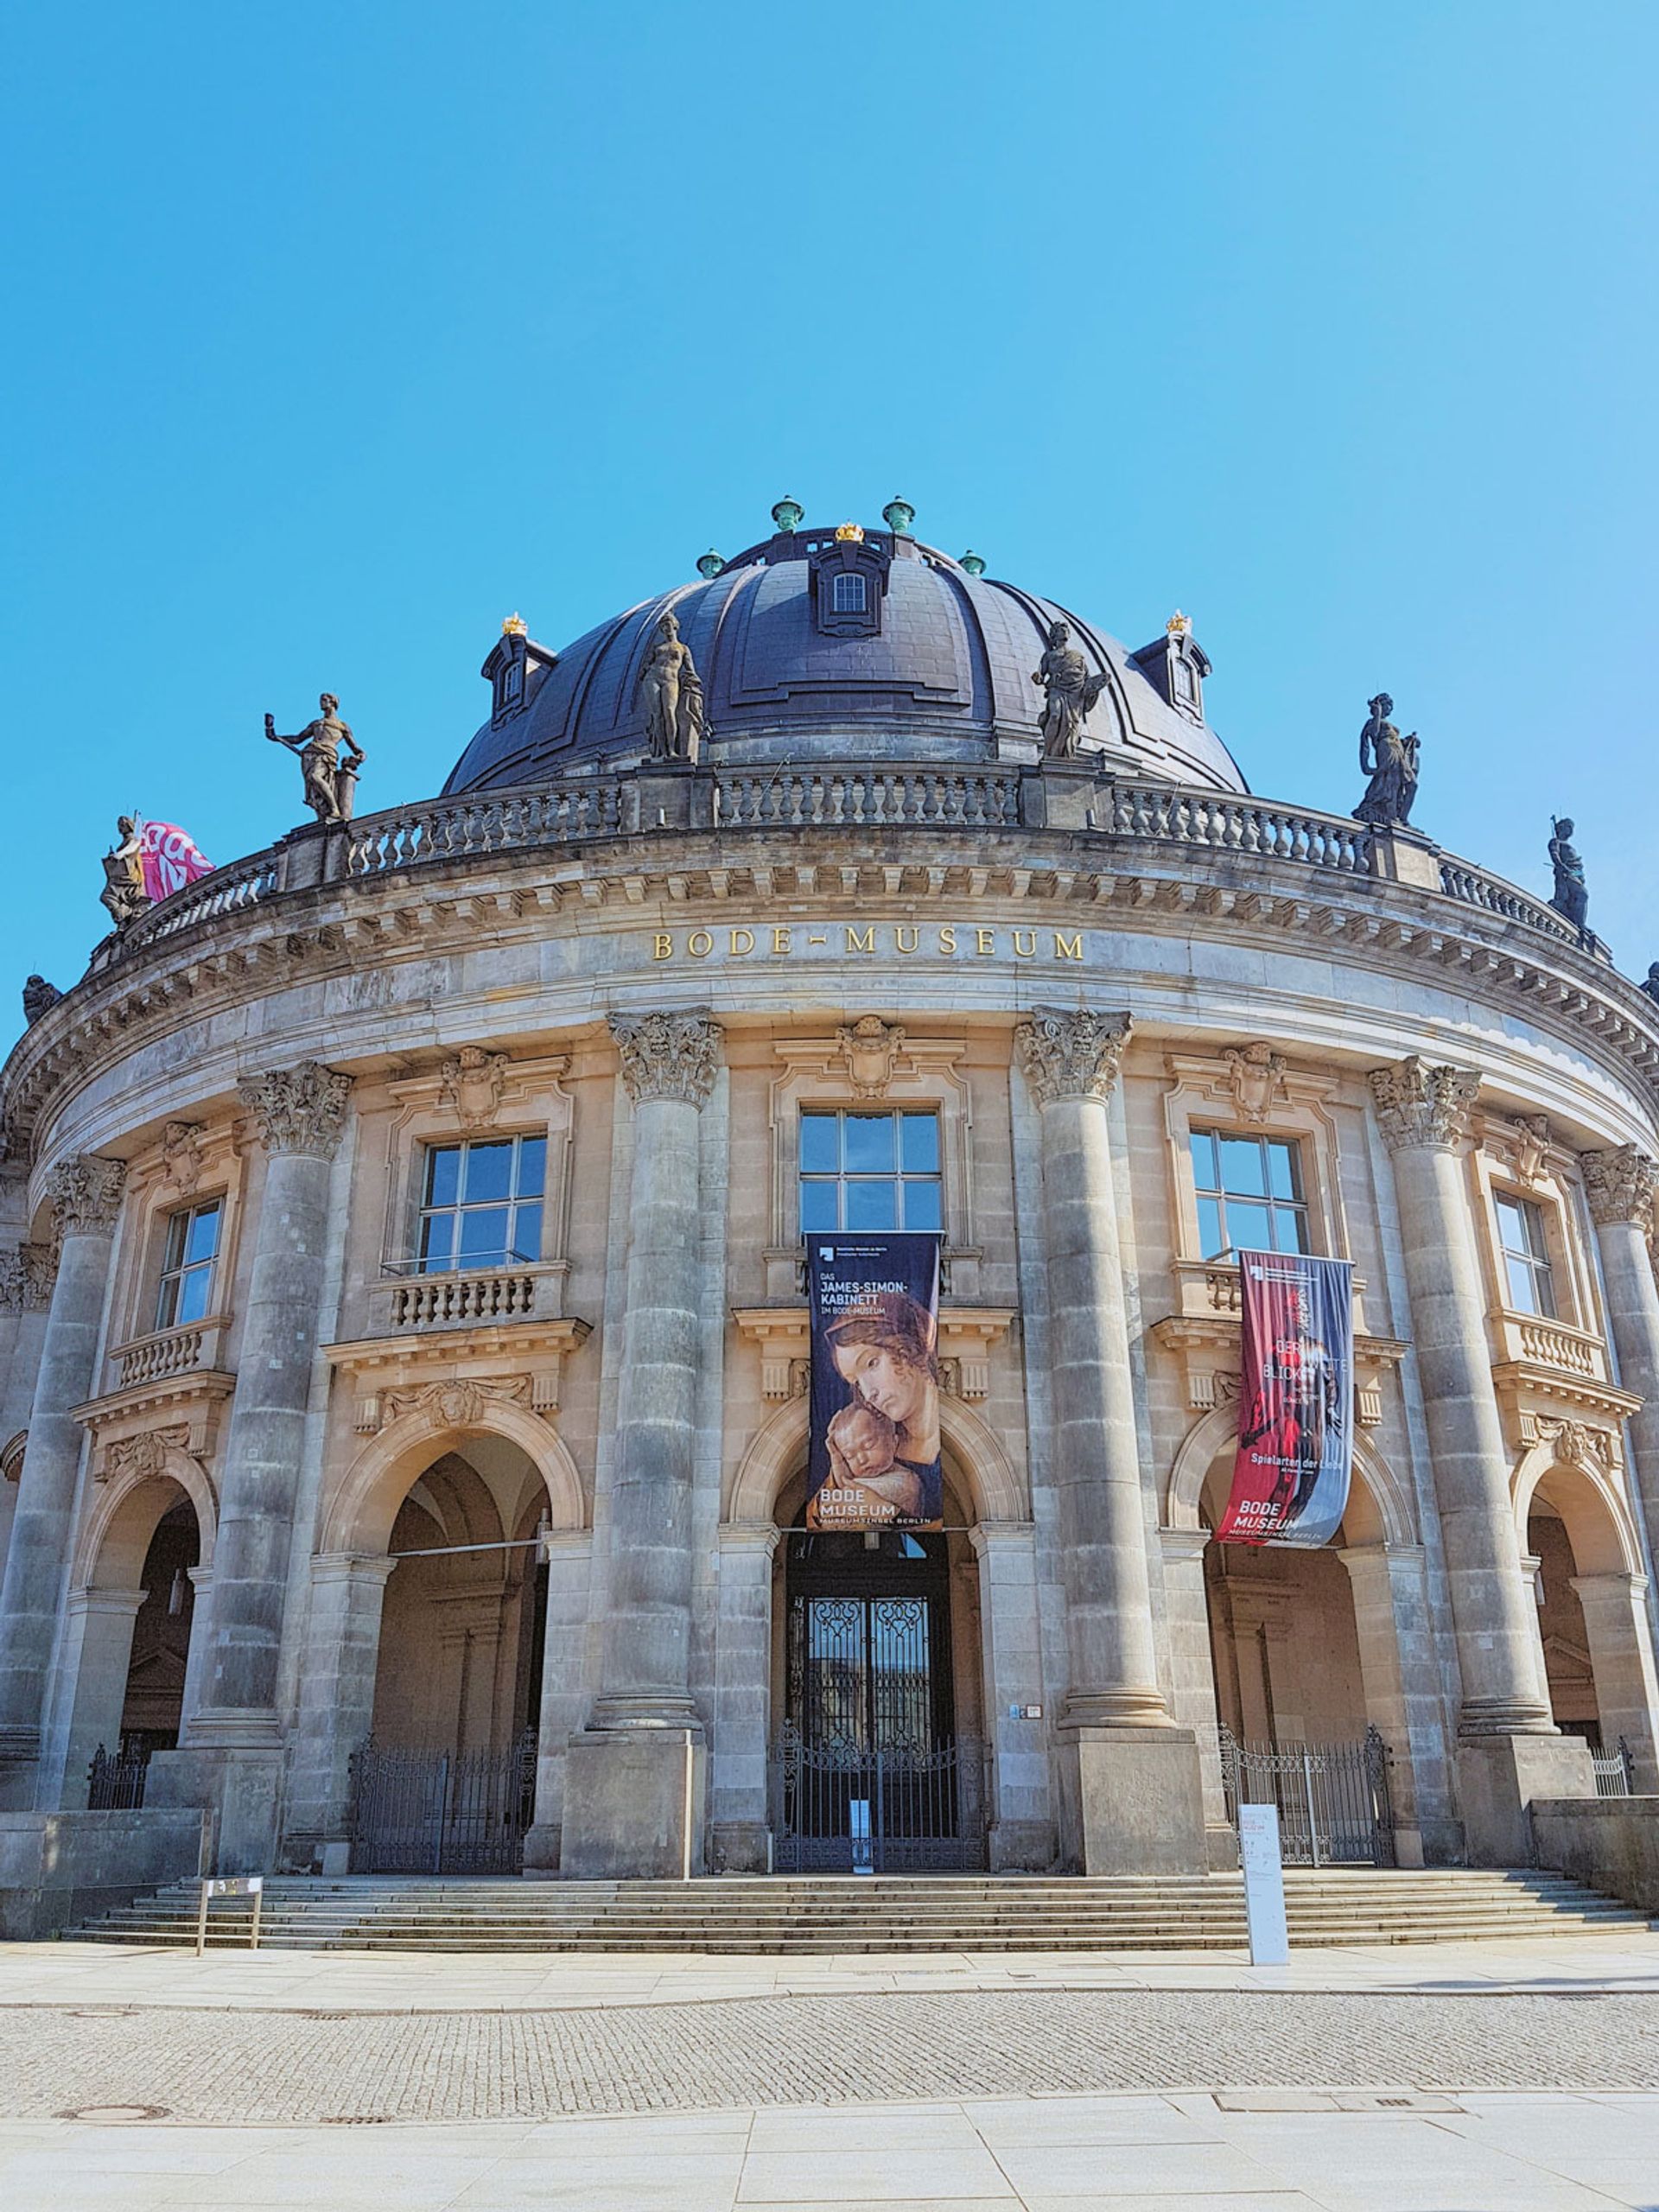 Berlin’s State Museums will give more details next week on re-openings © Reiseuhu